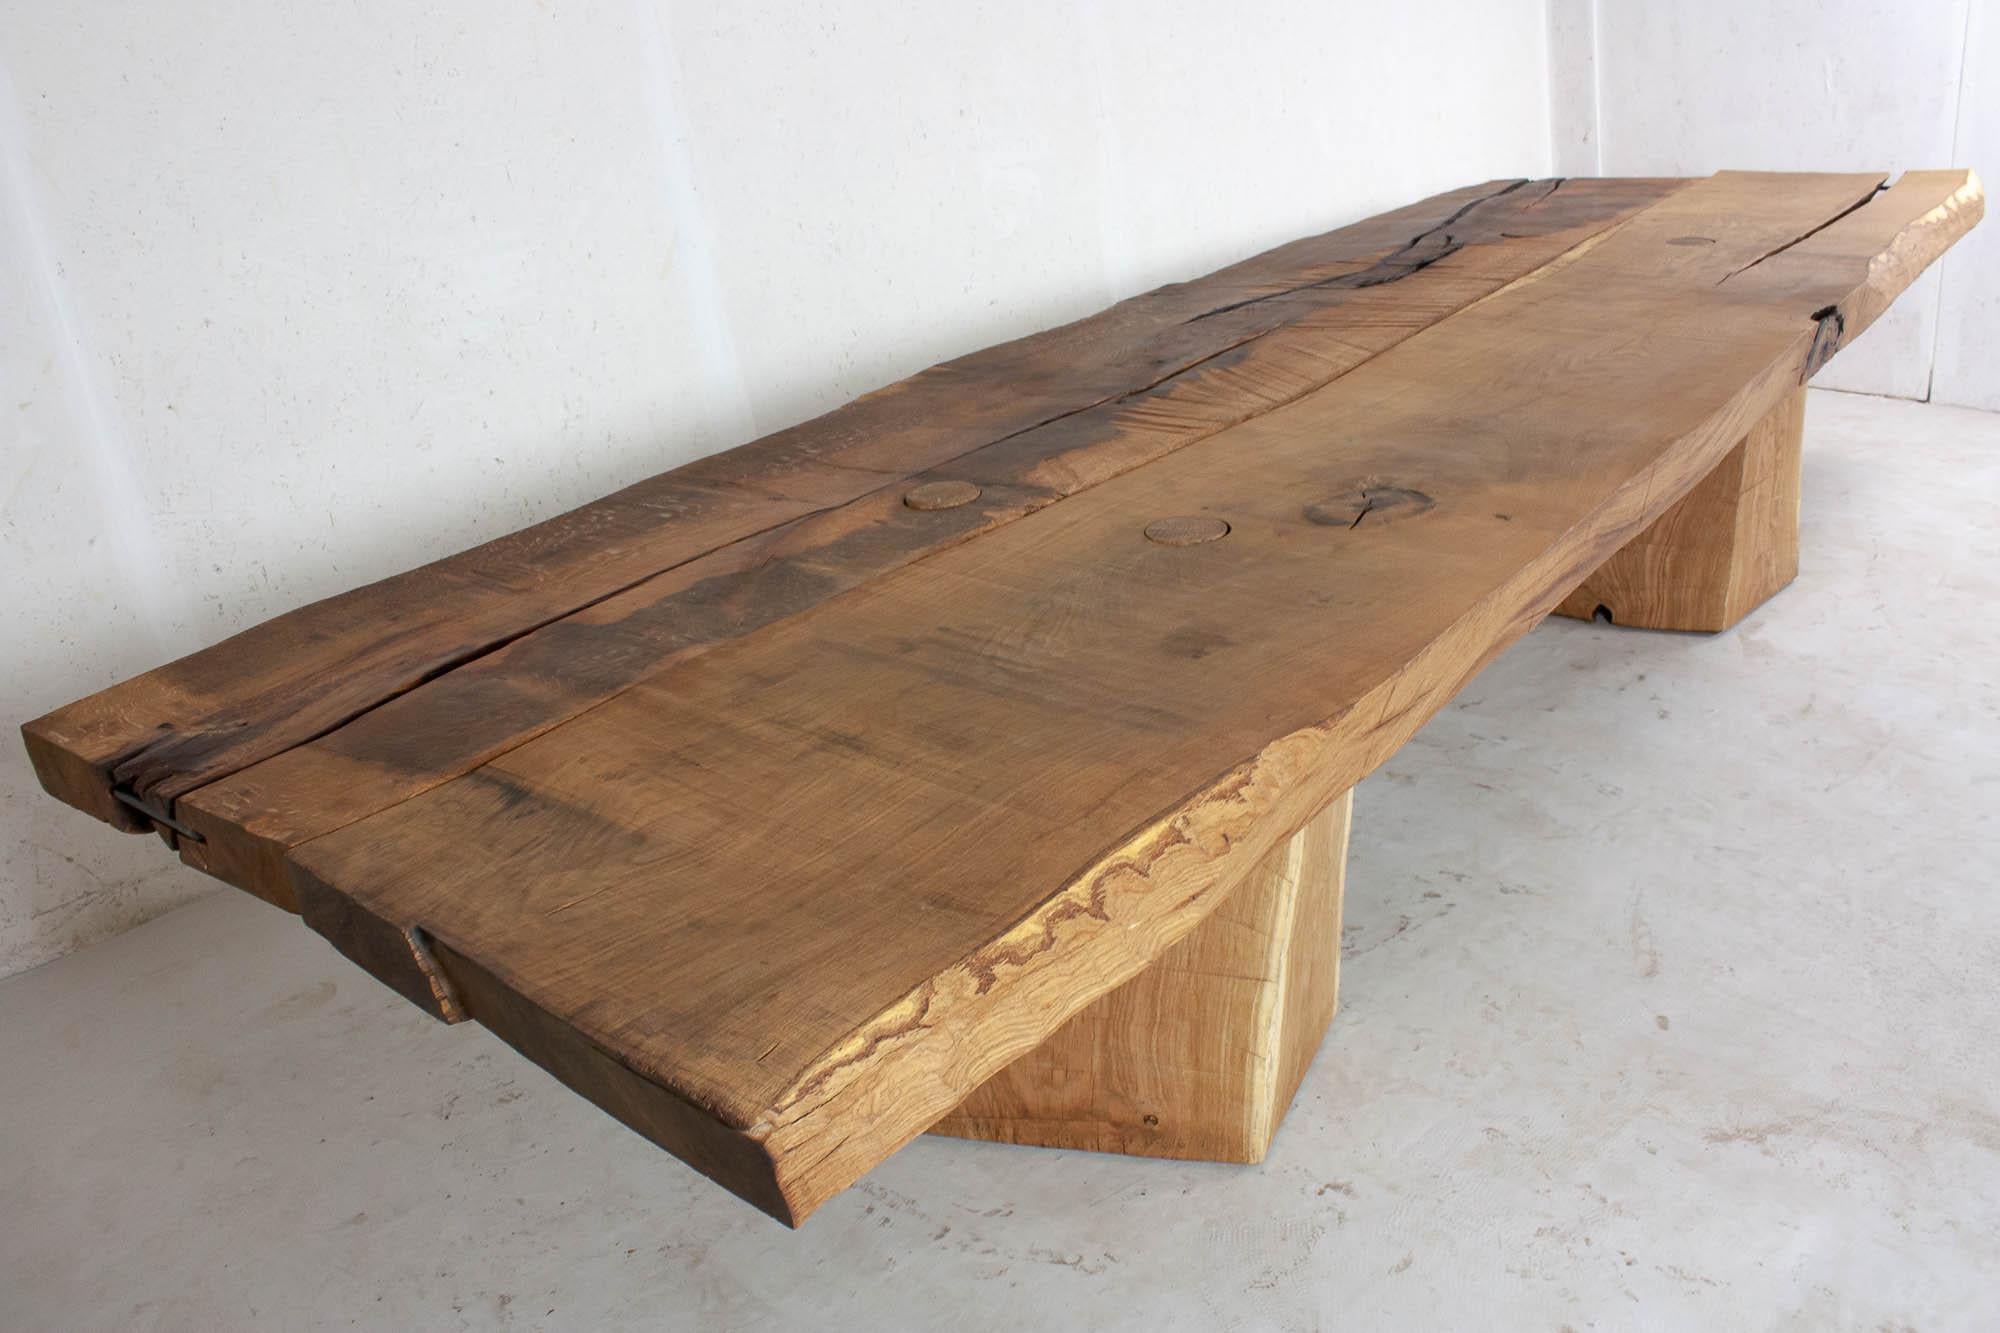 Armenian Sculpted Massive Dining Table V3 in Solid Oakwood, Custom Size: 11'Lx44